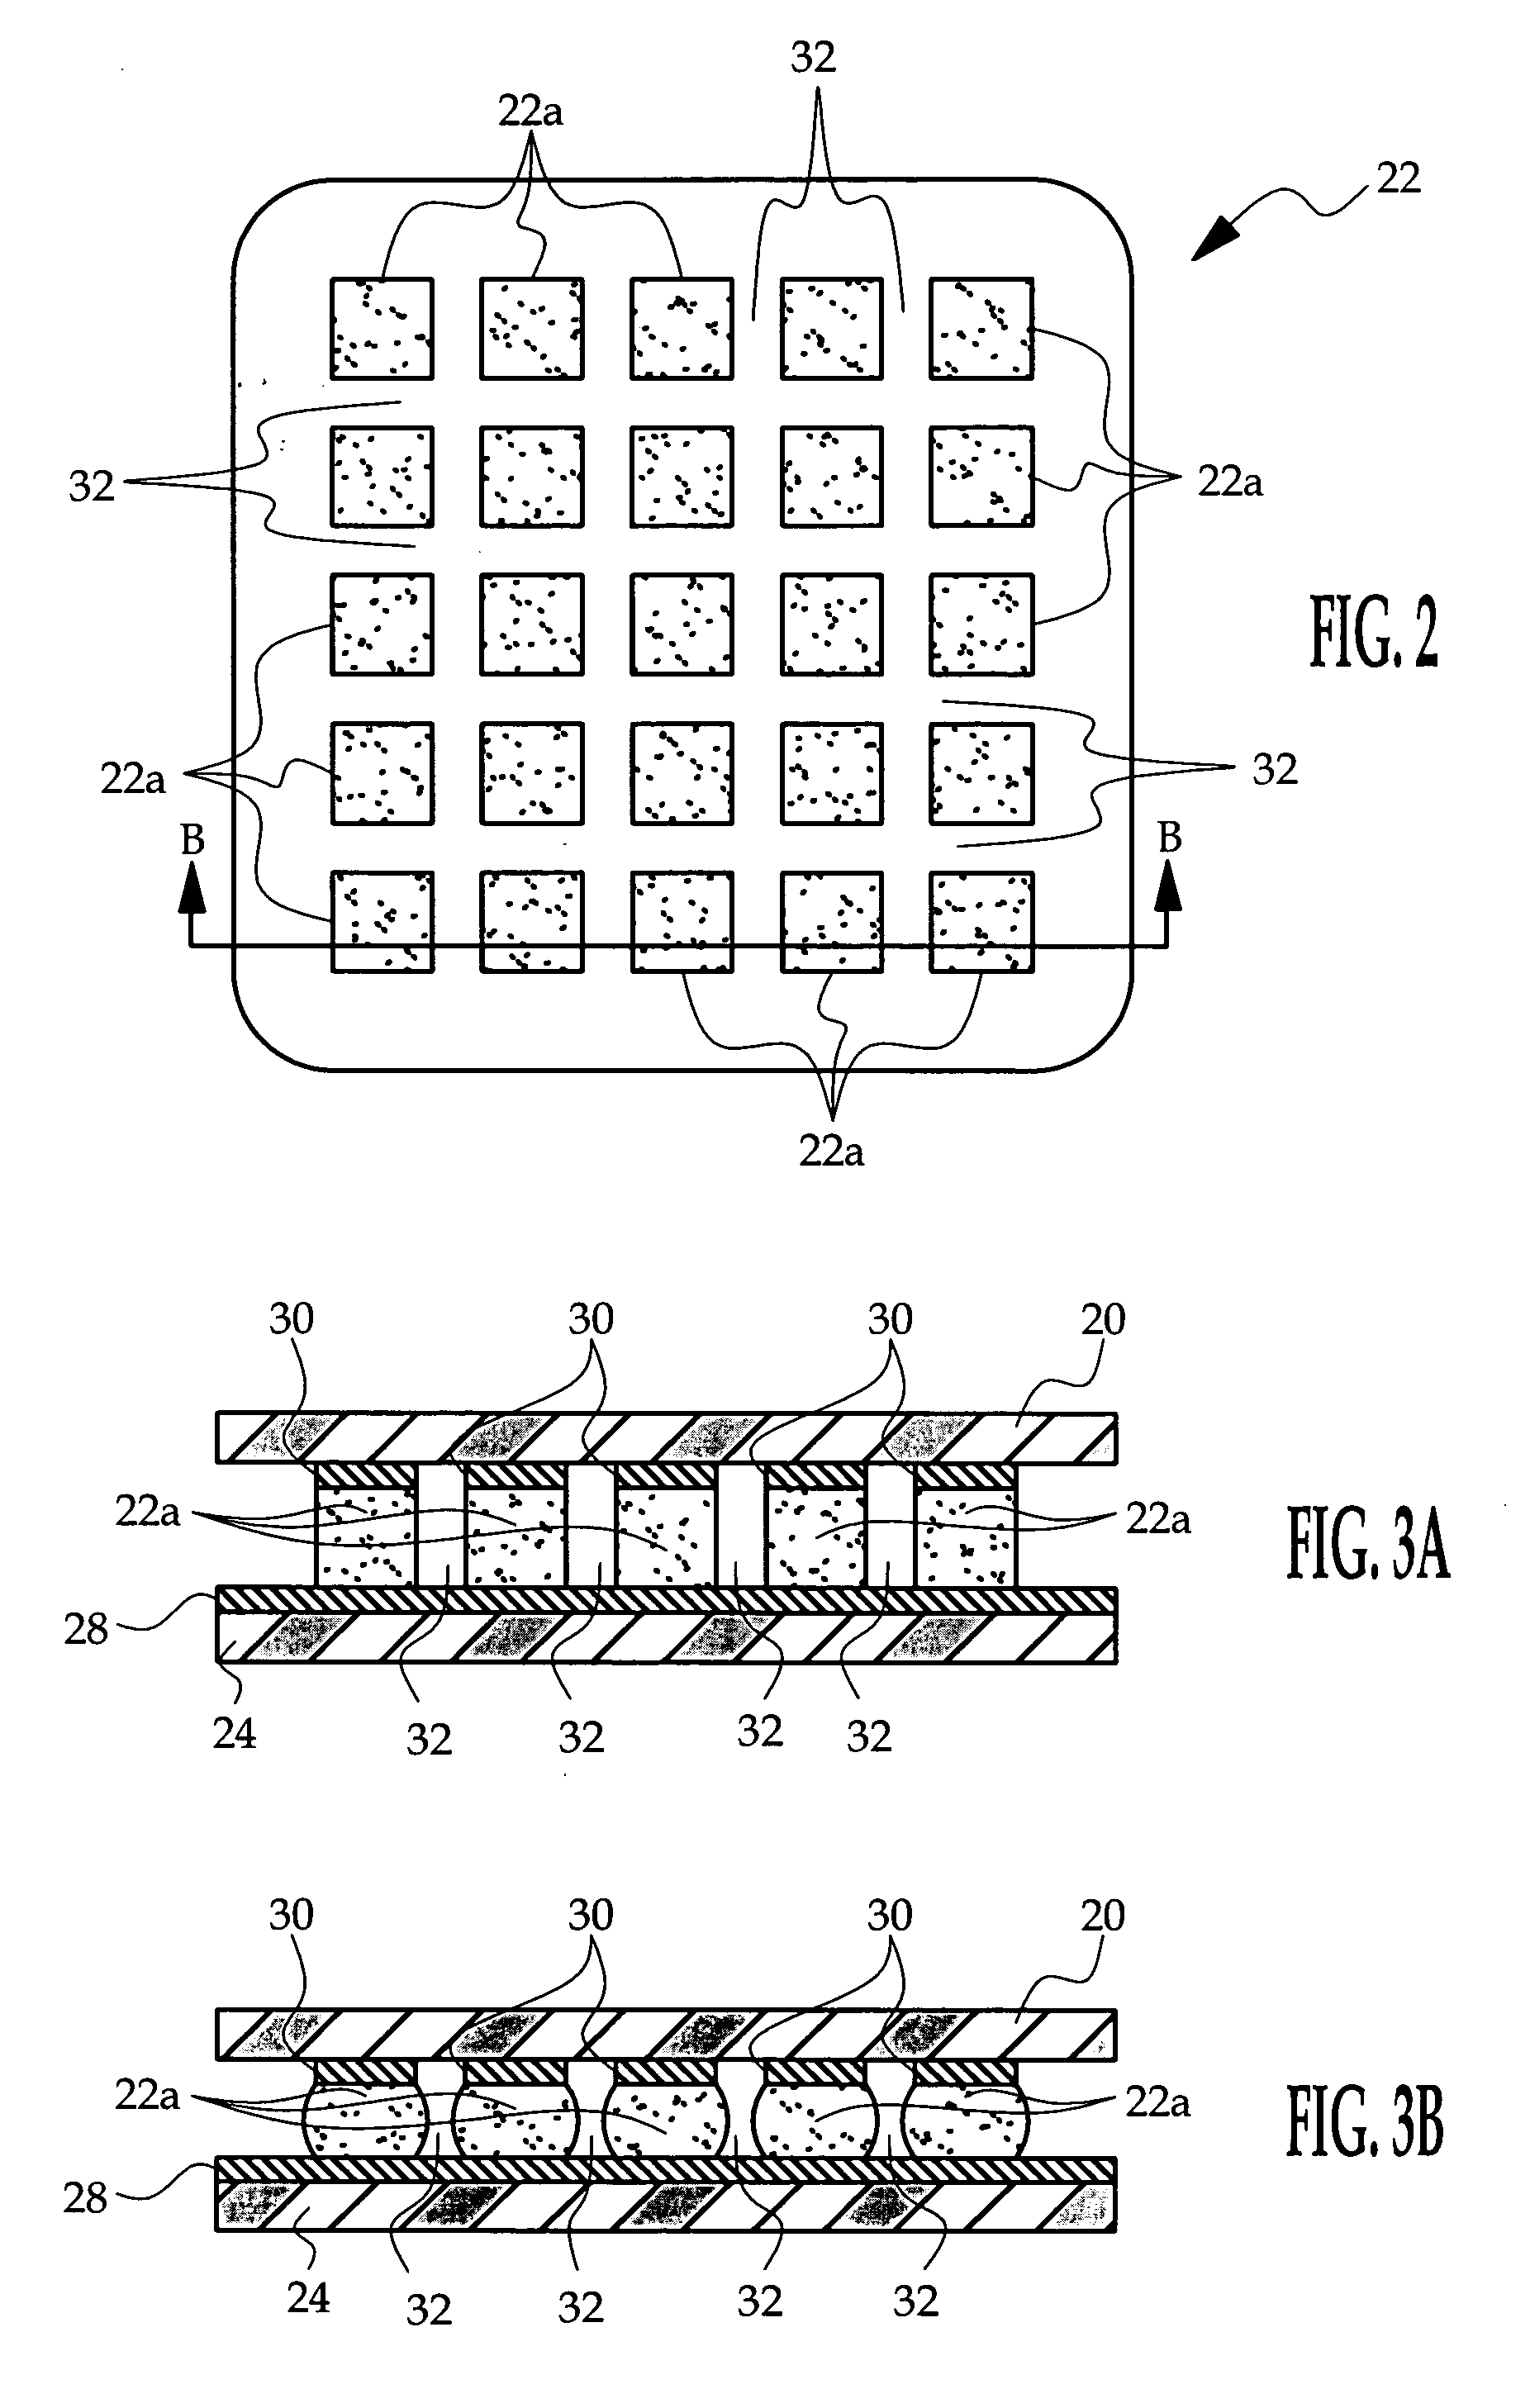 Capacitive load cell apparatus having silicone-impregnated foam dielectric pads